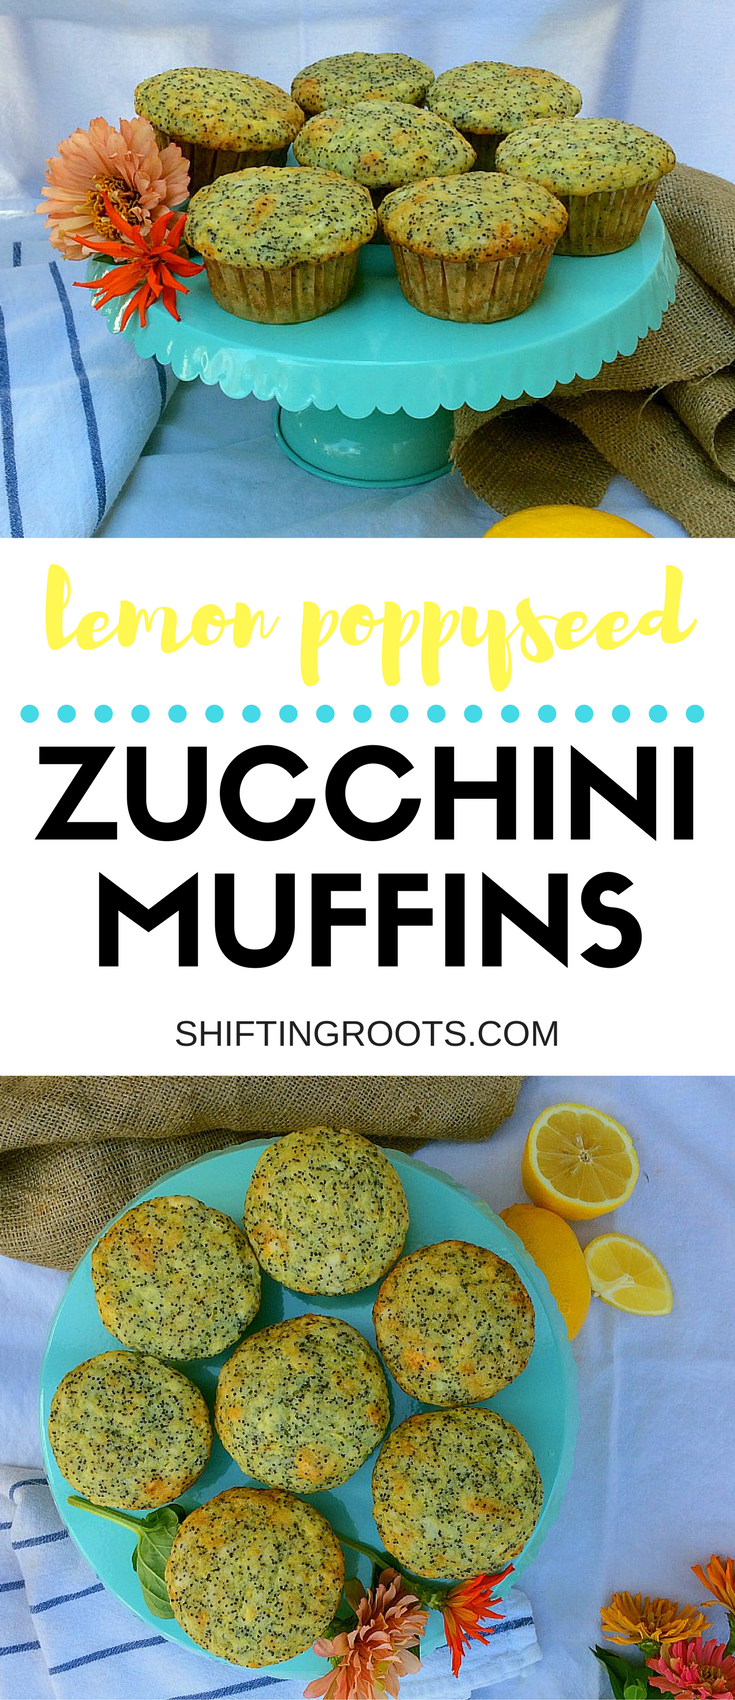 Lemon poppyseed zucchini muffins are a great way to use up all your zucchini or summer squash. Serve them for back to school lunches, snacks, or even breakfast. It's such an easy recipe that you can even make it with your kids.